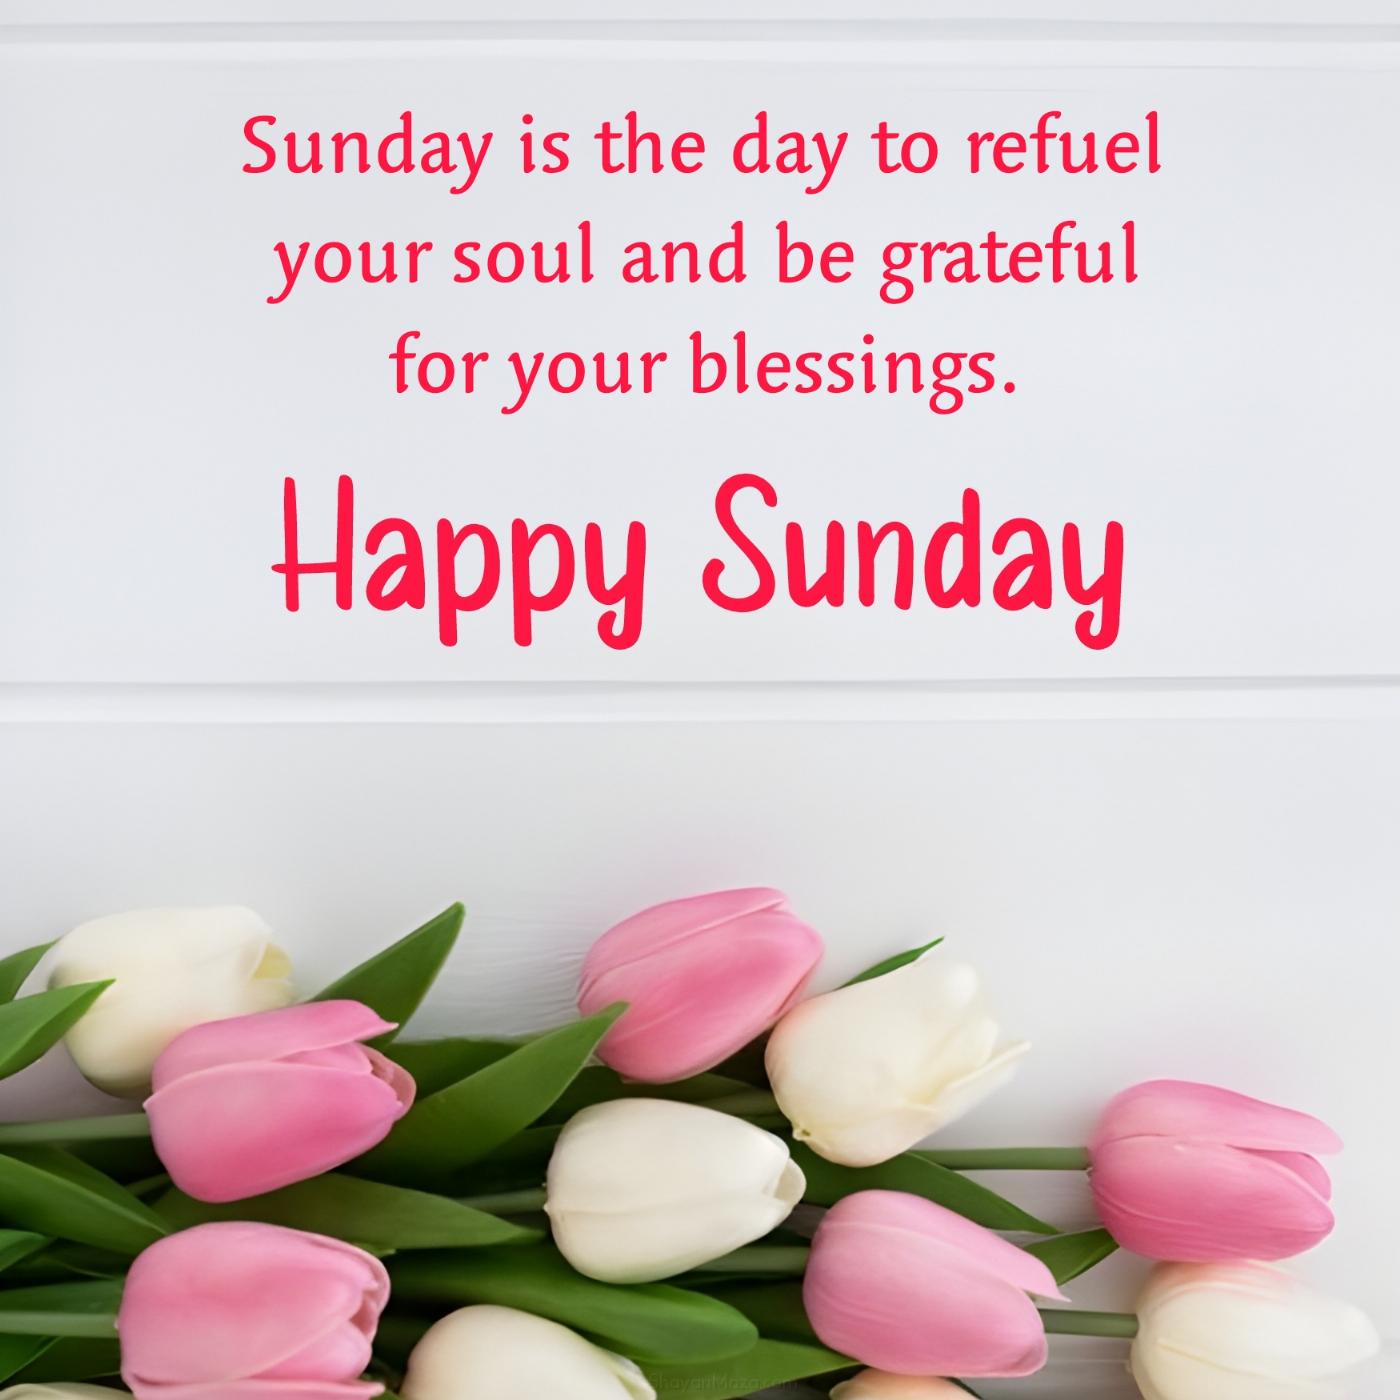 Sunday is the day to refuel your soul and be grateful